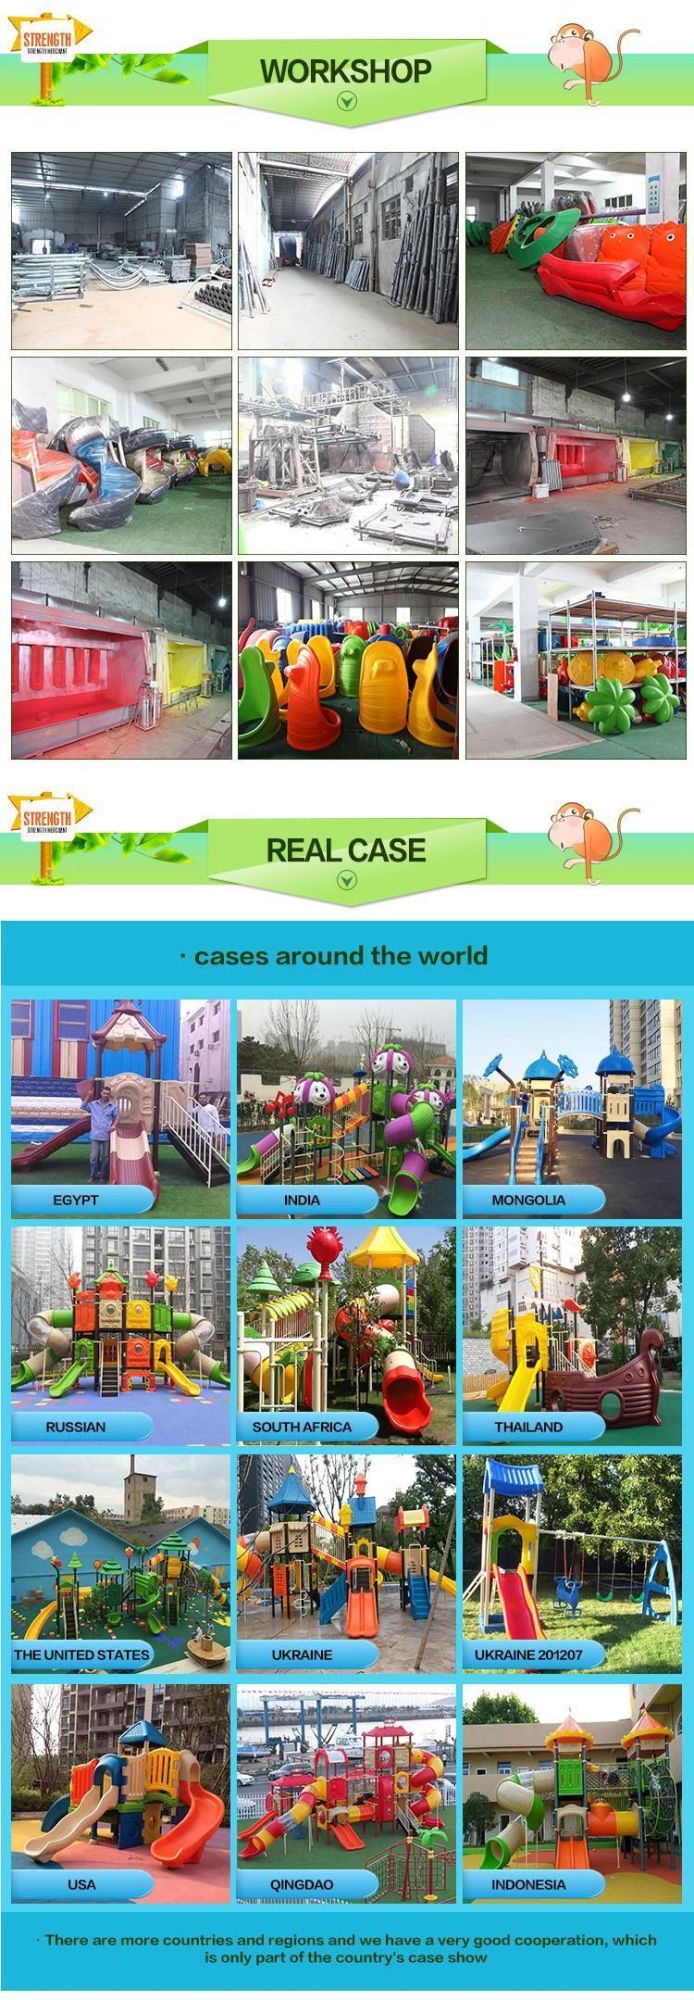 Park Large Playground, Funny Outdoor Equipment with Tube Slide